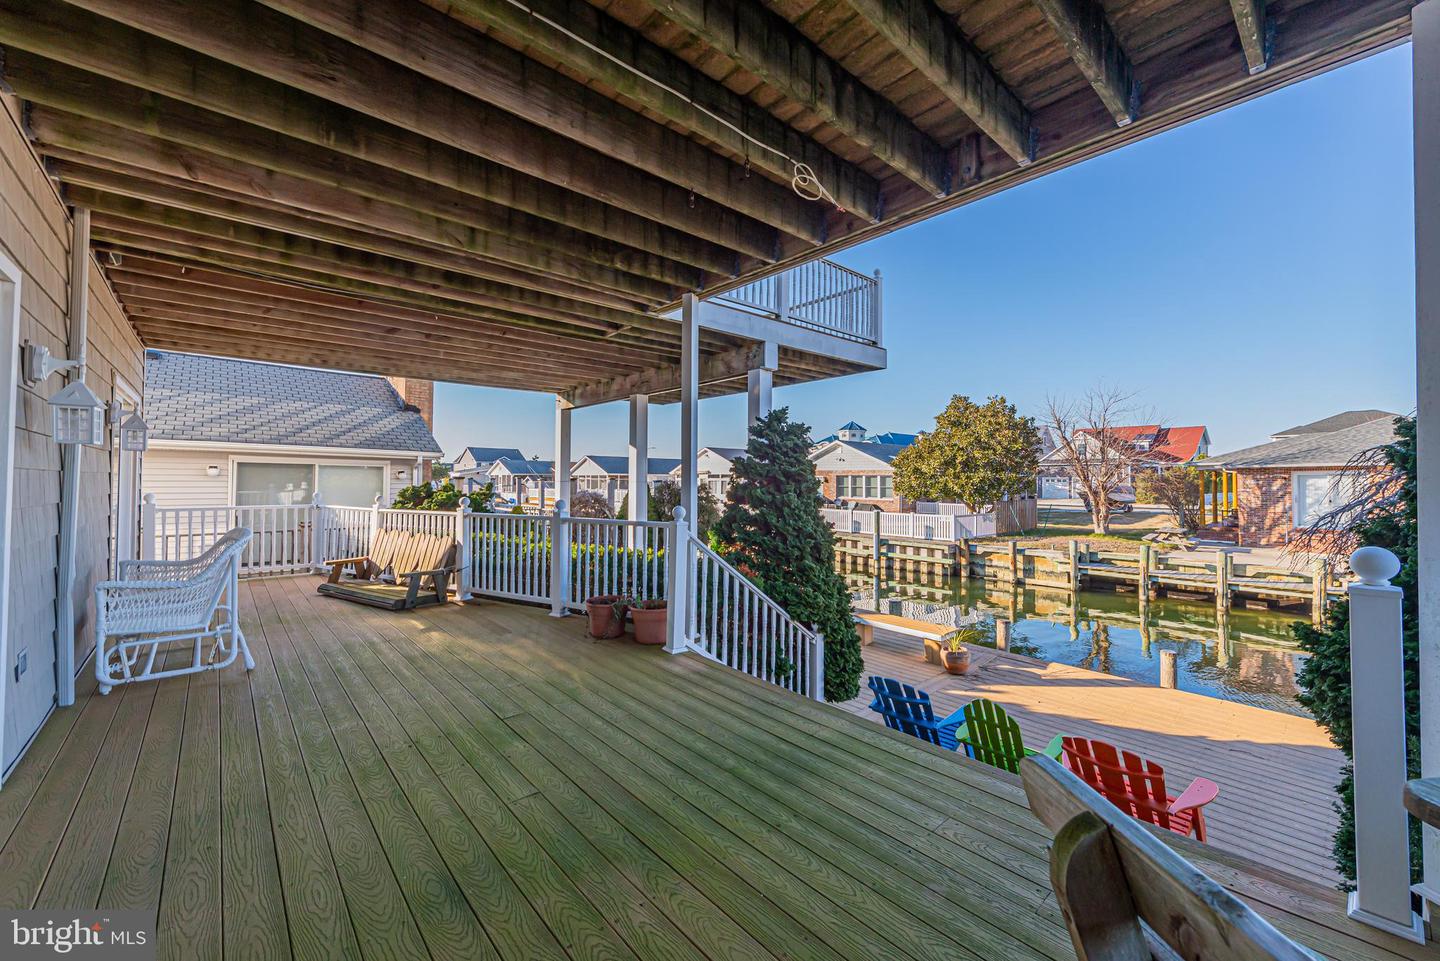 154 Old Wharf Road, Ocean City, Maryland, 21842, United States, 4 Bedrooms Bedrooms, ,3 BathroomsBathrooms,Residential,For Sale,154 Old Wharf Road,1479271